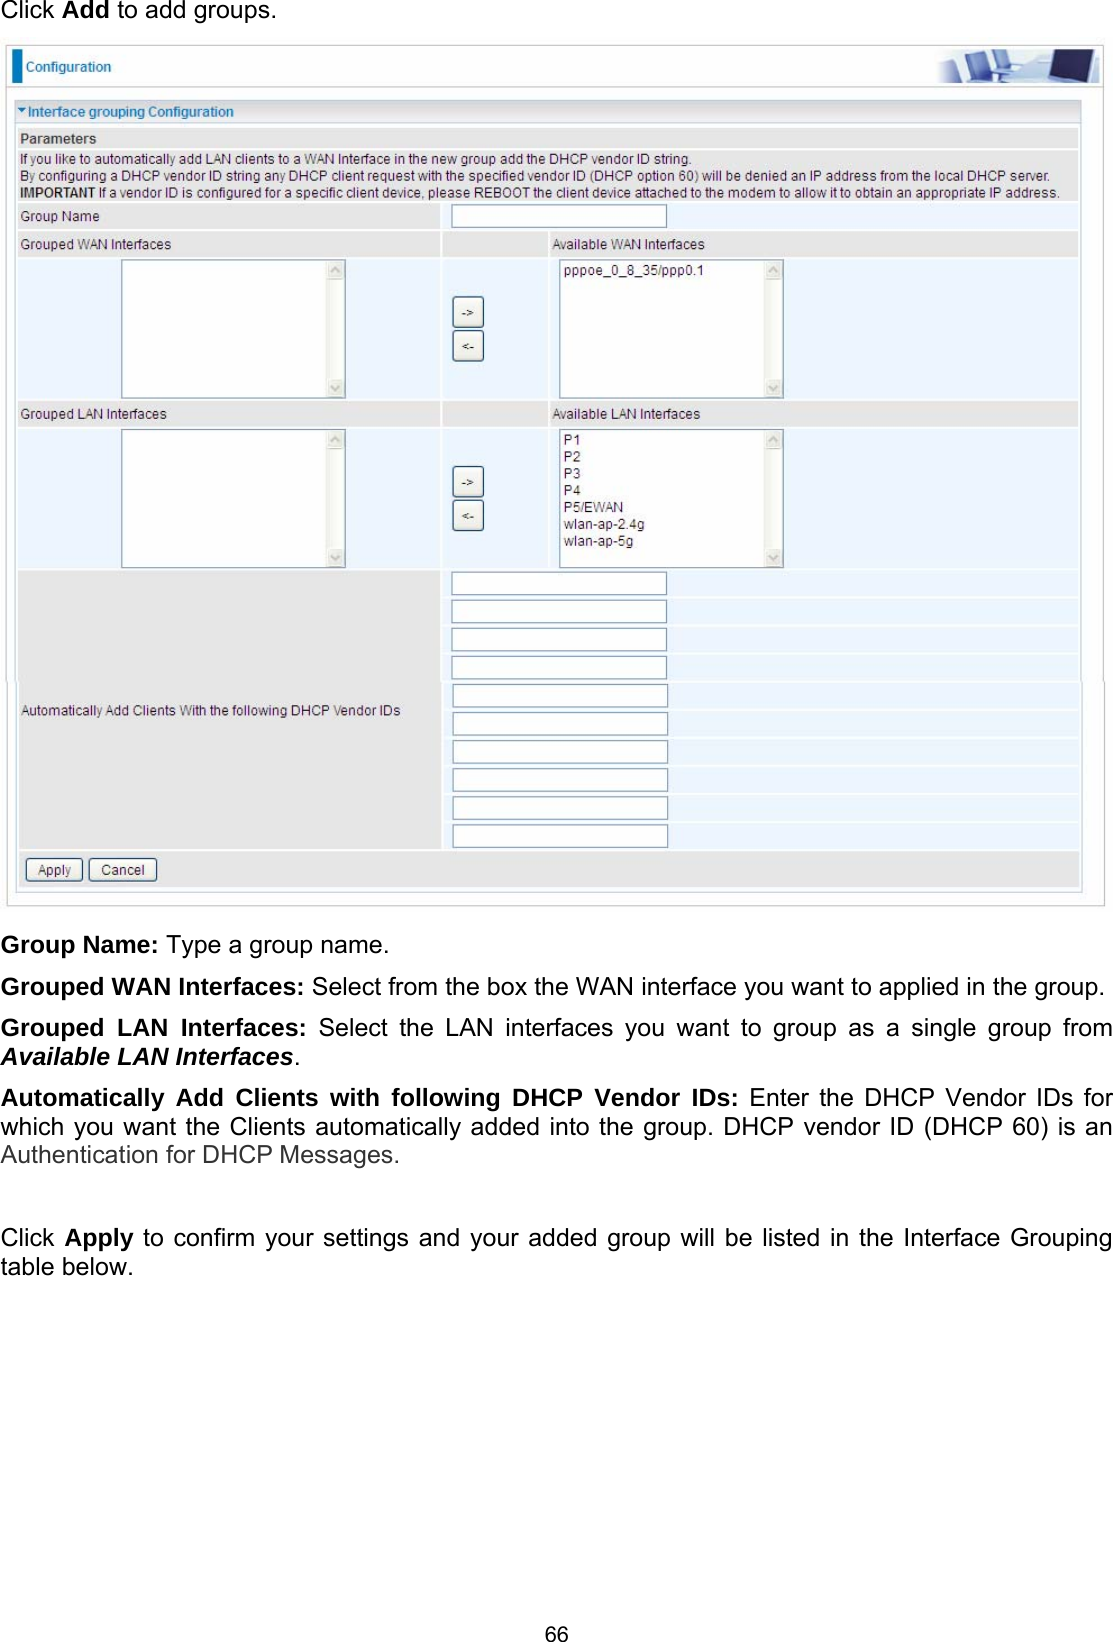  66 Click Add to add groups.   Group Name: Type a group name. Grouped WAN Interfaces: Select from the box the WAN interface you want to applied in the group. Grouped LAN Interfaces: Select the LAN interfaces you want to group as a single group from Available LAN Interfaces.  Automatically Add Clients with following DHCP Vendor IDs: Enter the DHCP Vendor IDs for which you want the Clients automatically added into the group. DHCP vendor ID (DHCP 60) is an Authentication for DHCP Messages.  Click Apply to confirm your settings and your added group will be listed in the Interface Grouping table below. 